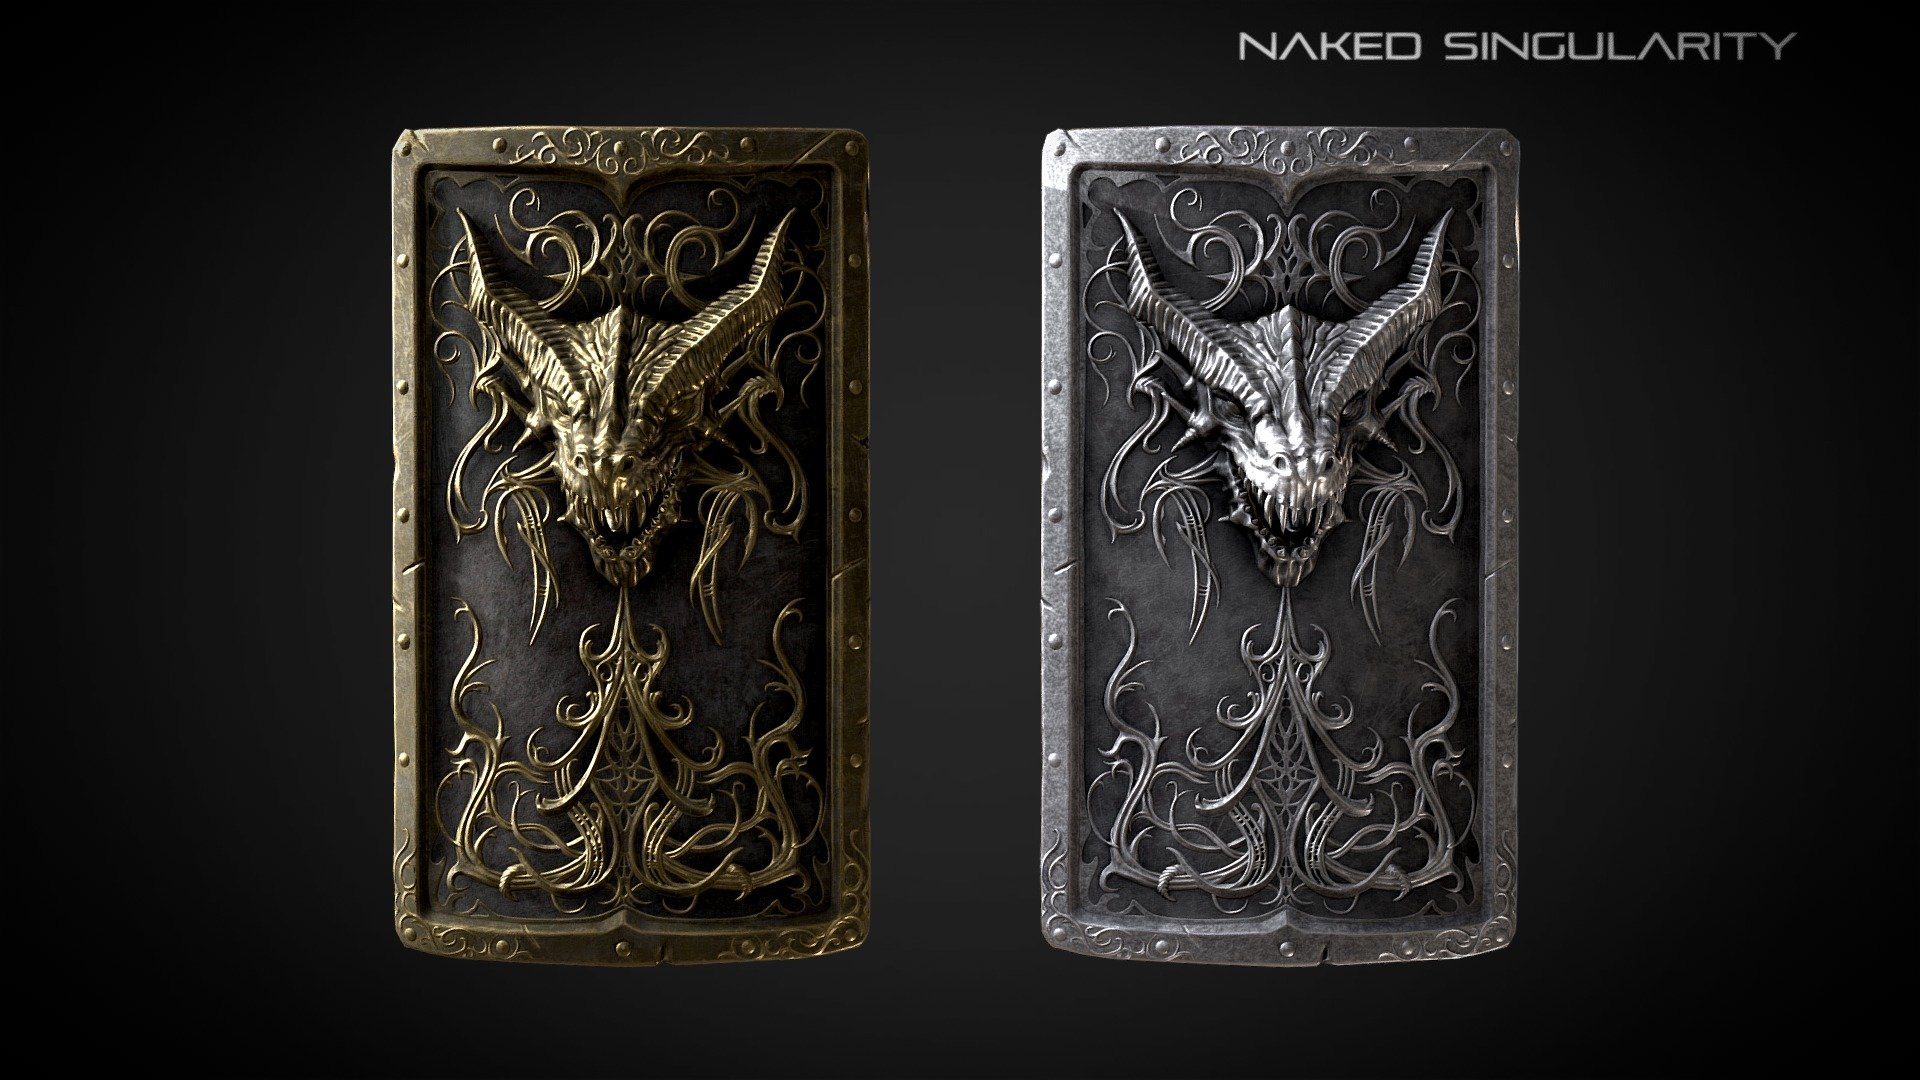 Dragon tower shield | Medieval dark fantasy weapon | 4K | Lowpoly | PBR

Original concept by Naked Singularity. Inspire by Dark Souls triology and Elden Ring




High quality low poly model.

4K High resolution texture.

Real world scale.

PBR texturing.

Check out other Dark fantasy game asset

Customer support: nakedsingularity.studio@gmail.com

Follow us on: Youtube | Facebook | Instagram | Twitter | Artstation - Dragon tower shield | Dark fantasy weapon - Buy Royalty Free 3D model by Naked Singularity Studio (@nakedsingularity) 3d model